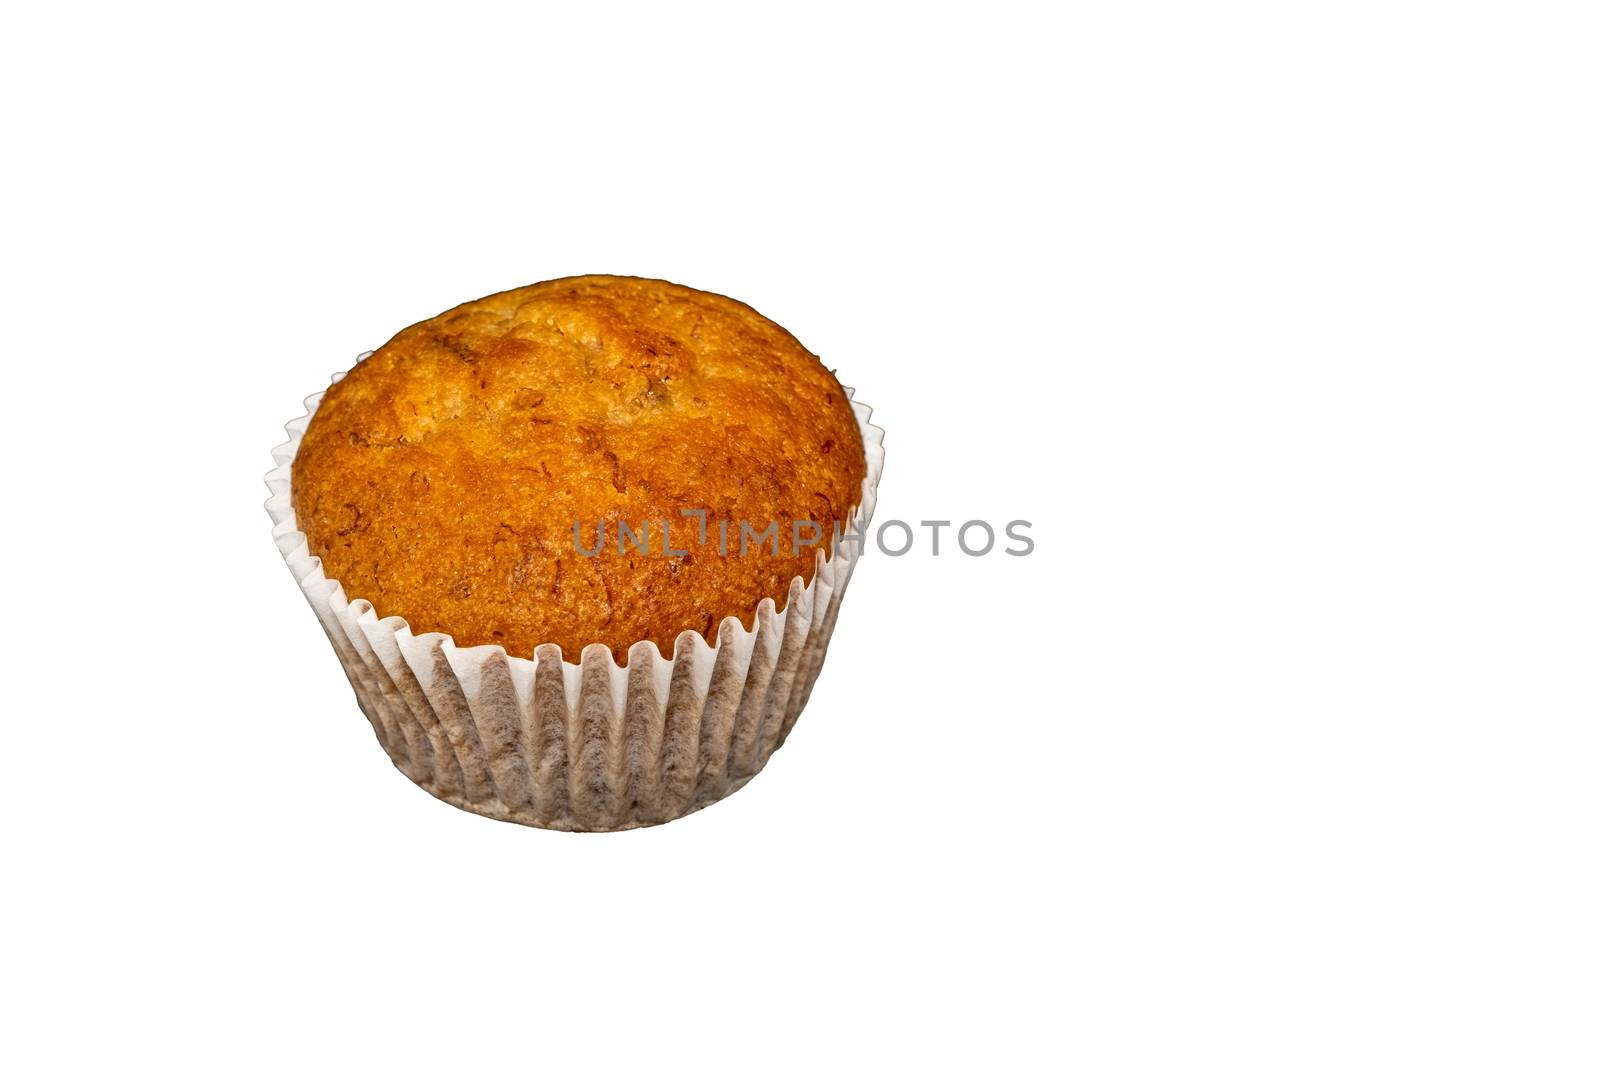 Homemade healthy banana bread or cake for breakfast isolate on white background by peerapixs